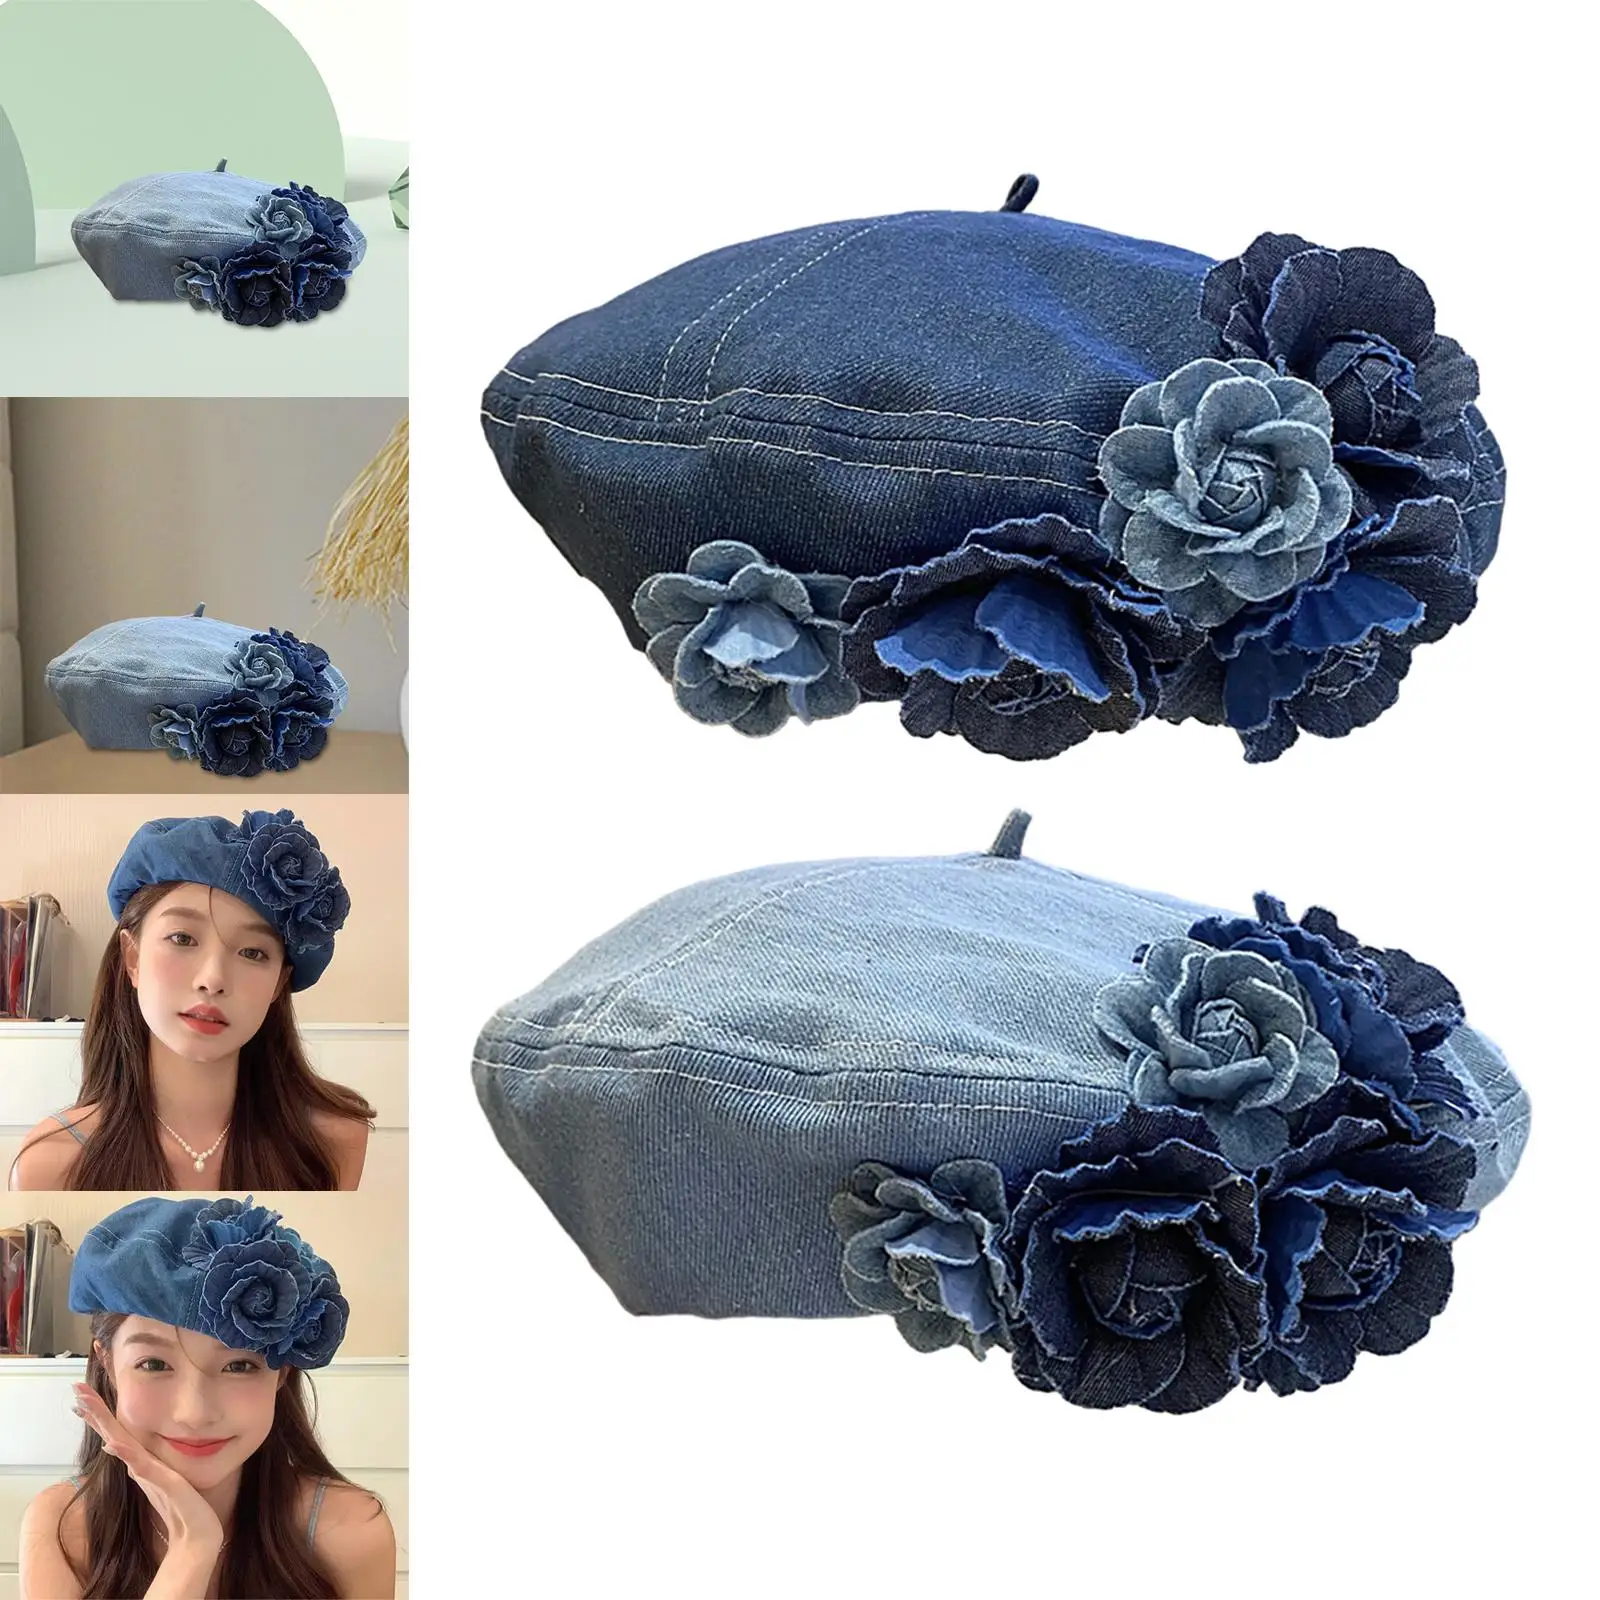 Women Beret Hat Casual Decorations Birthday Gift Classic Headwear Stylish Denim Cap for Festival Outdoor Traveling Hiking Fall